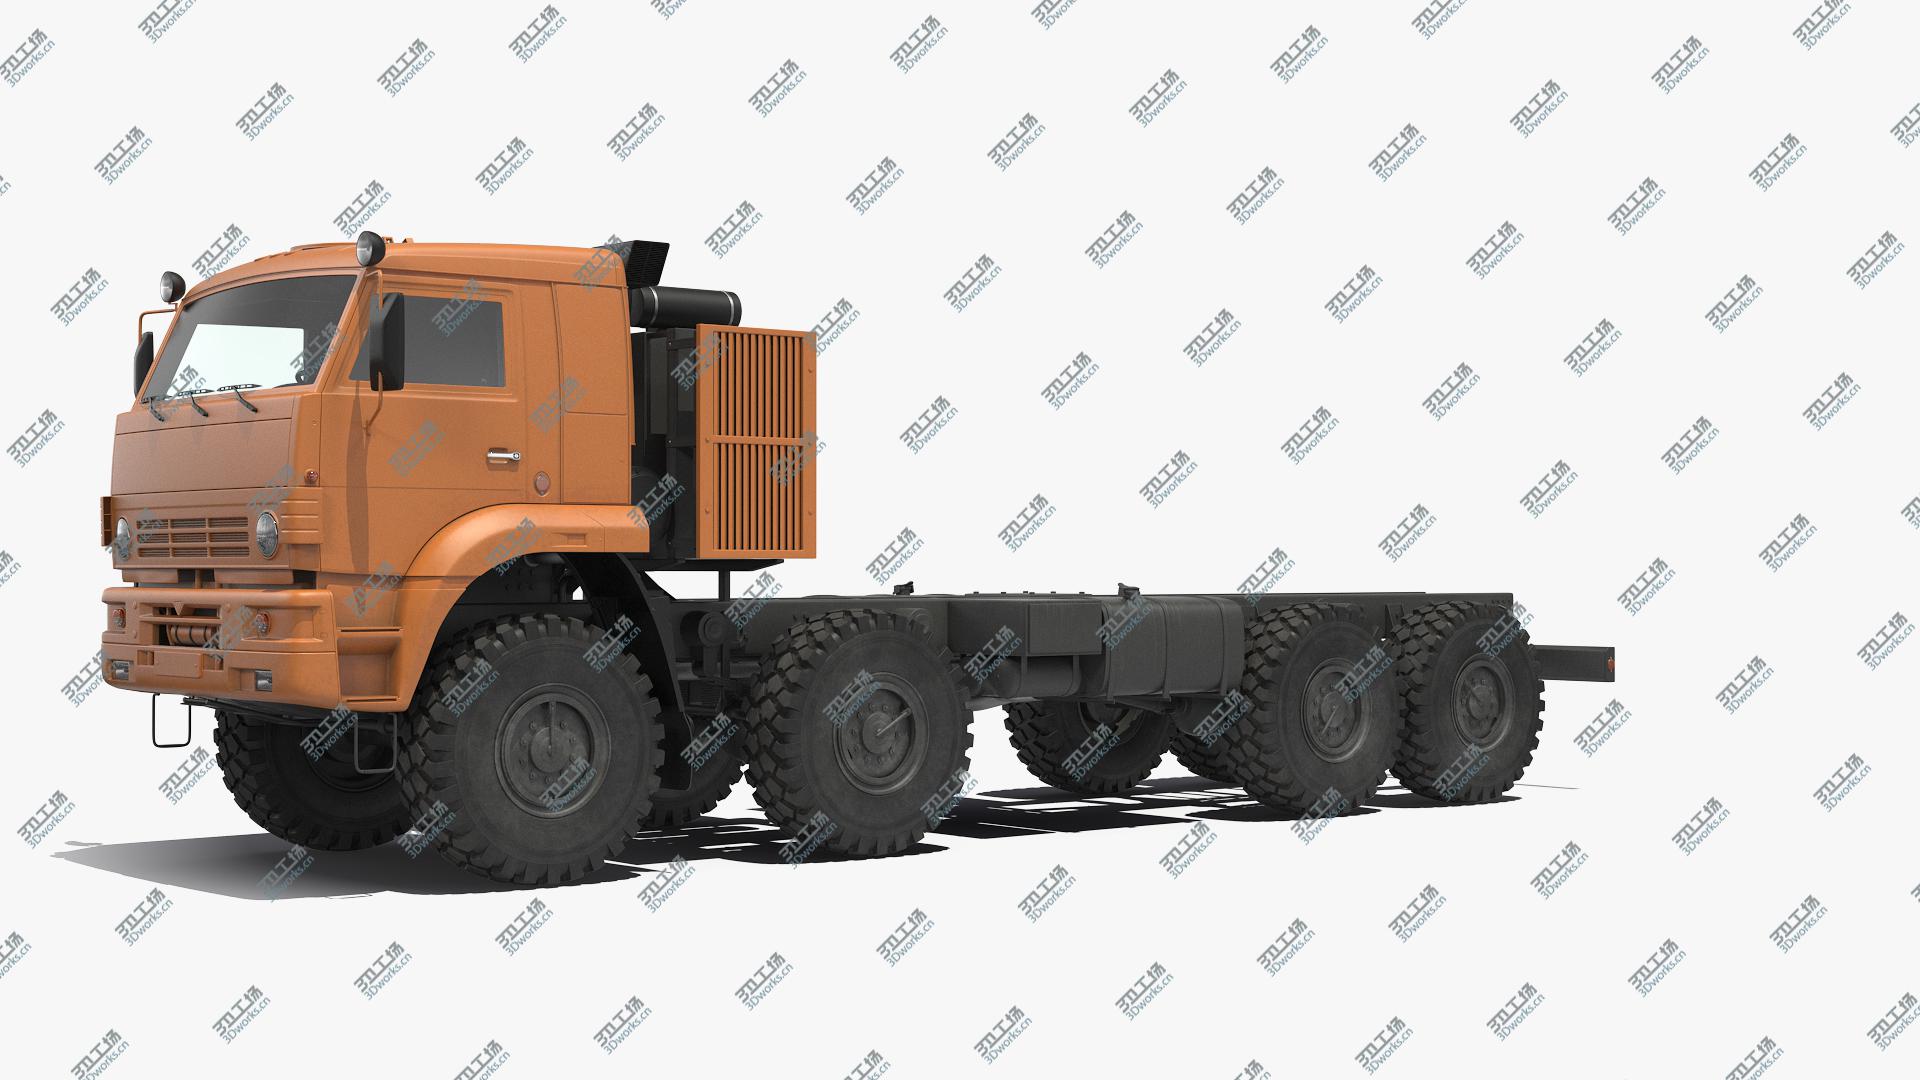 images/goods_img/202104021/3D 8x8 Truck Generic Rigged/3.jpg